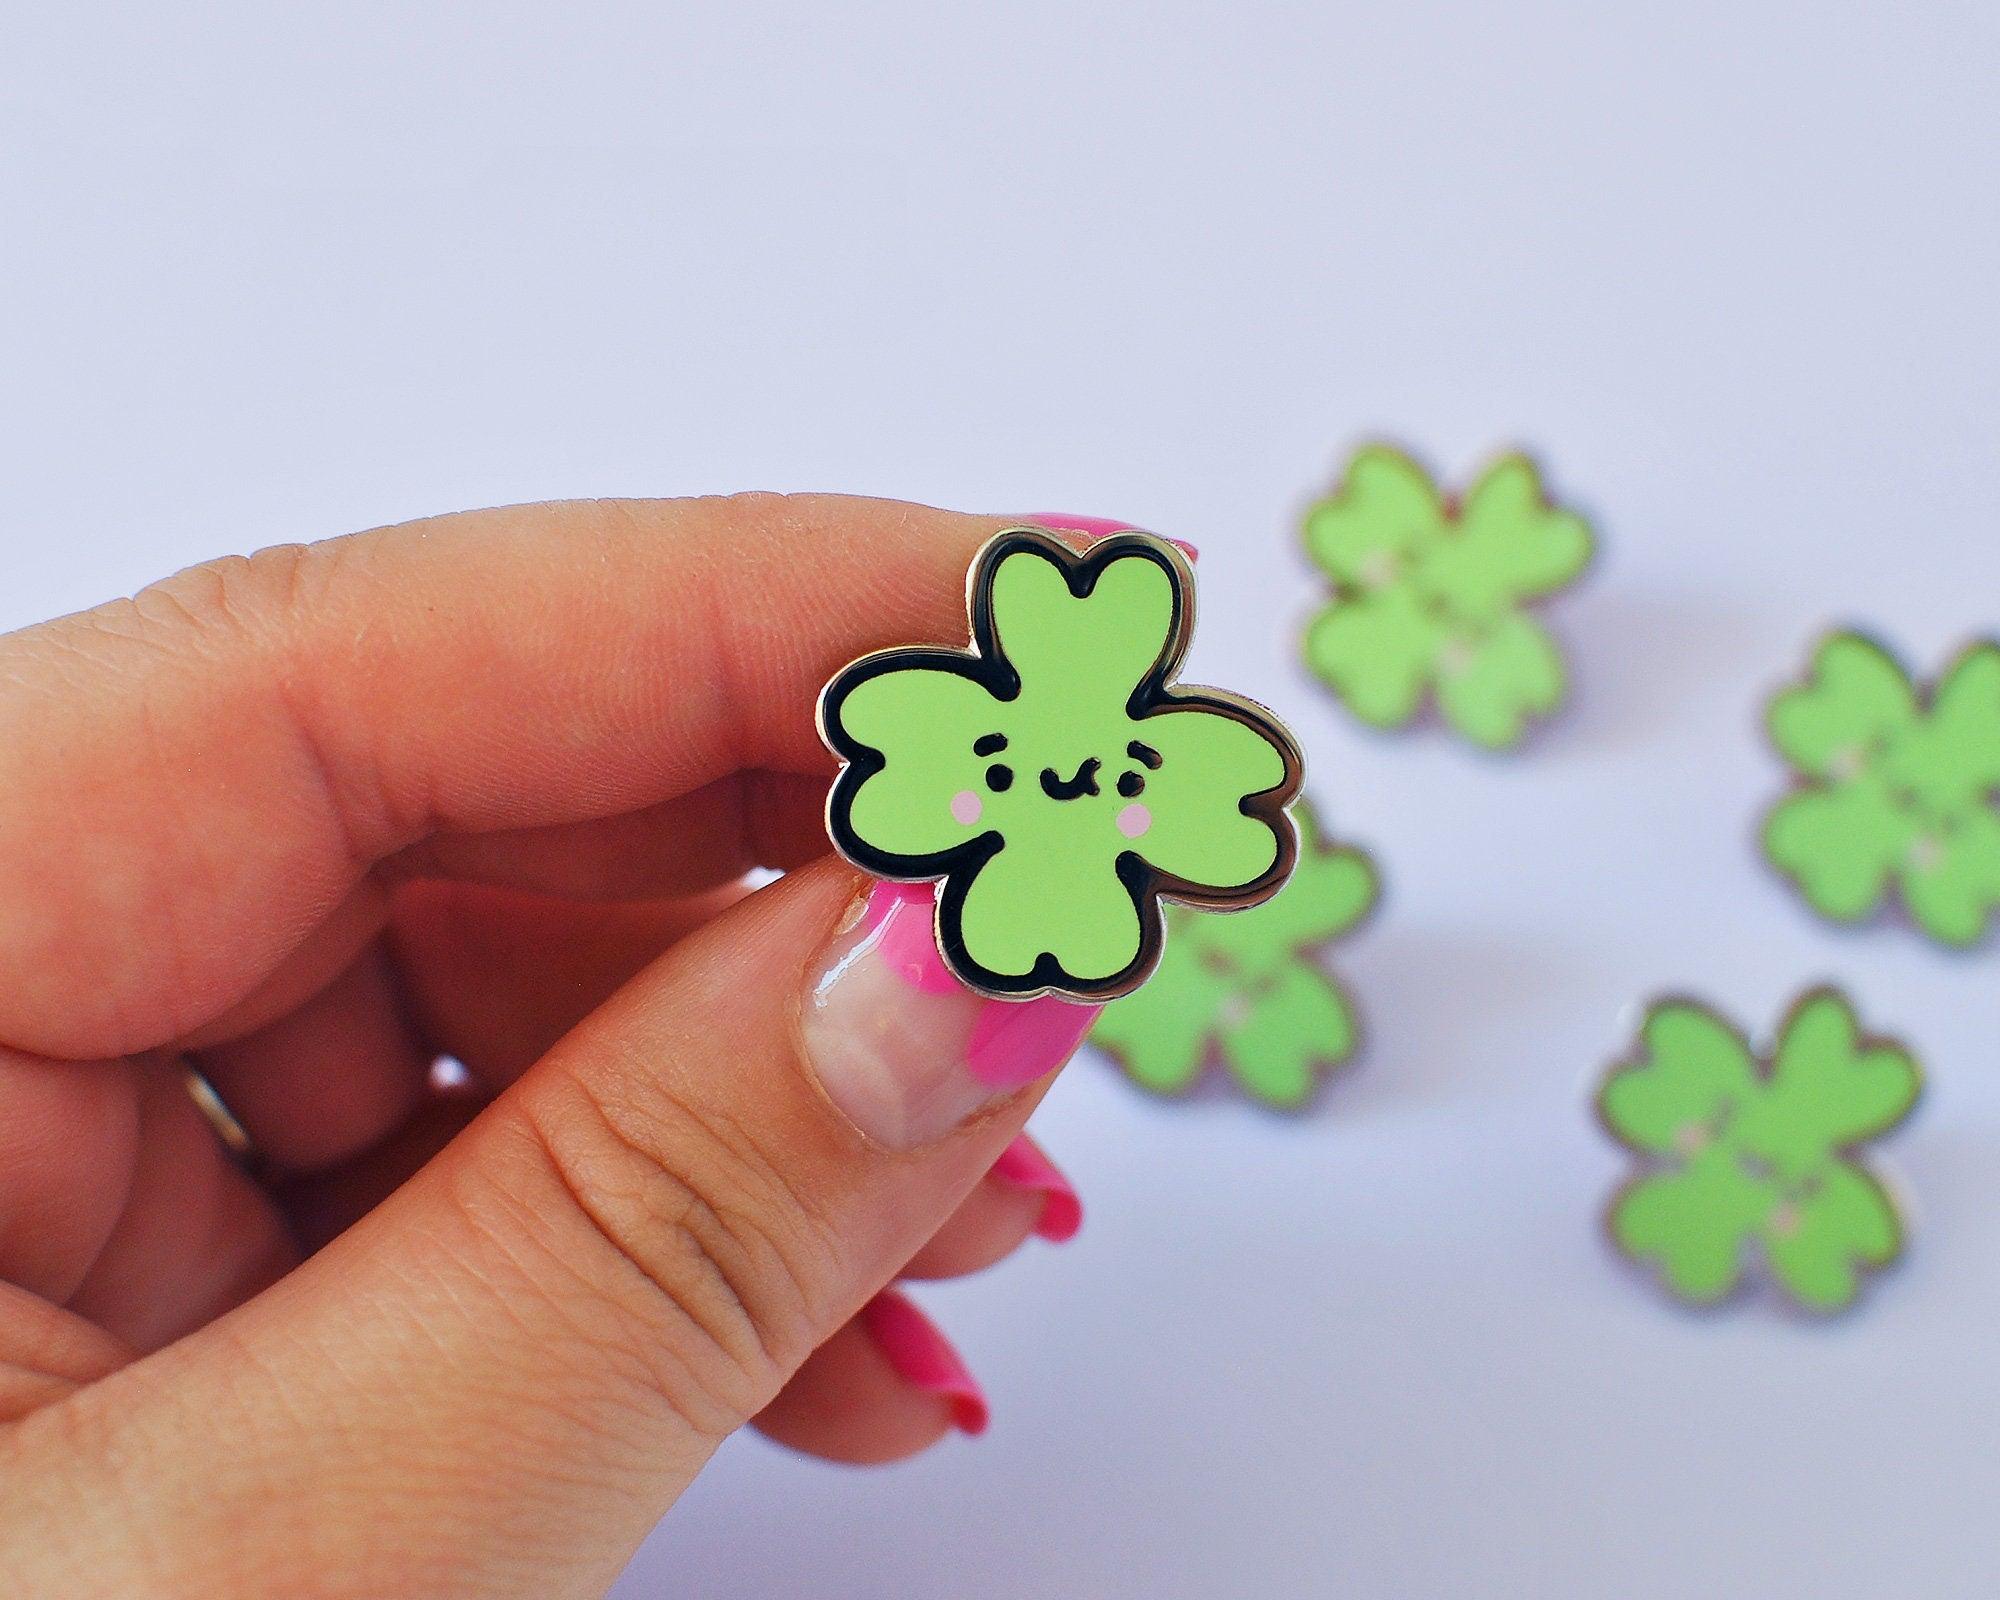 Lucky Charm Clover Enamel Pin - Adds luck to accessories - Ideal gift or personal accent, main